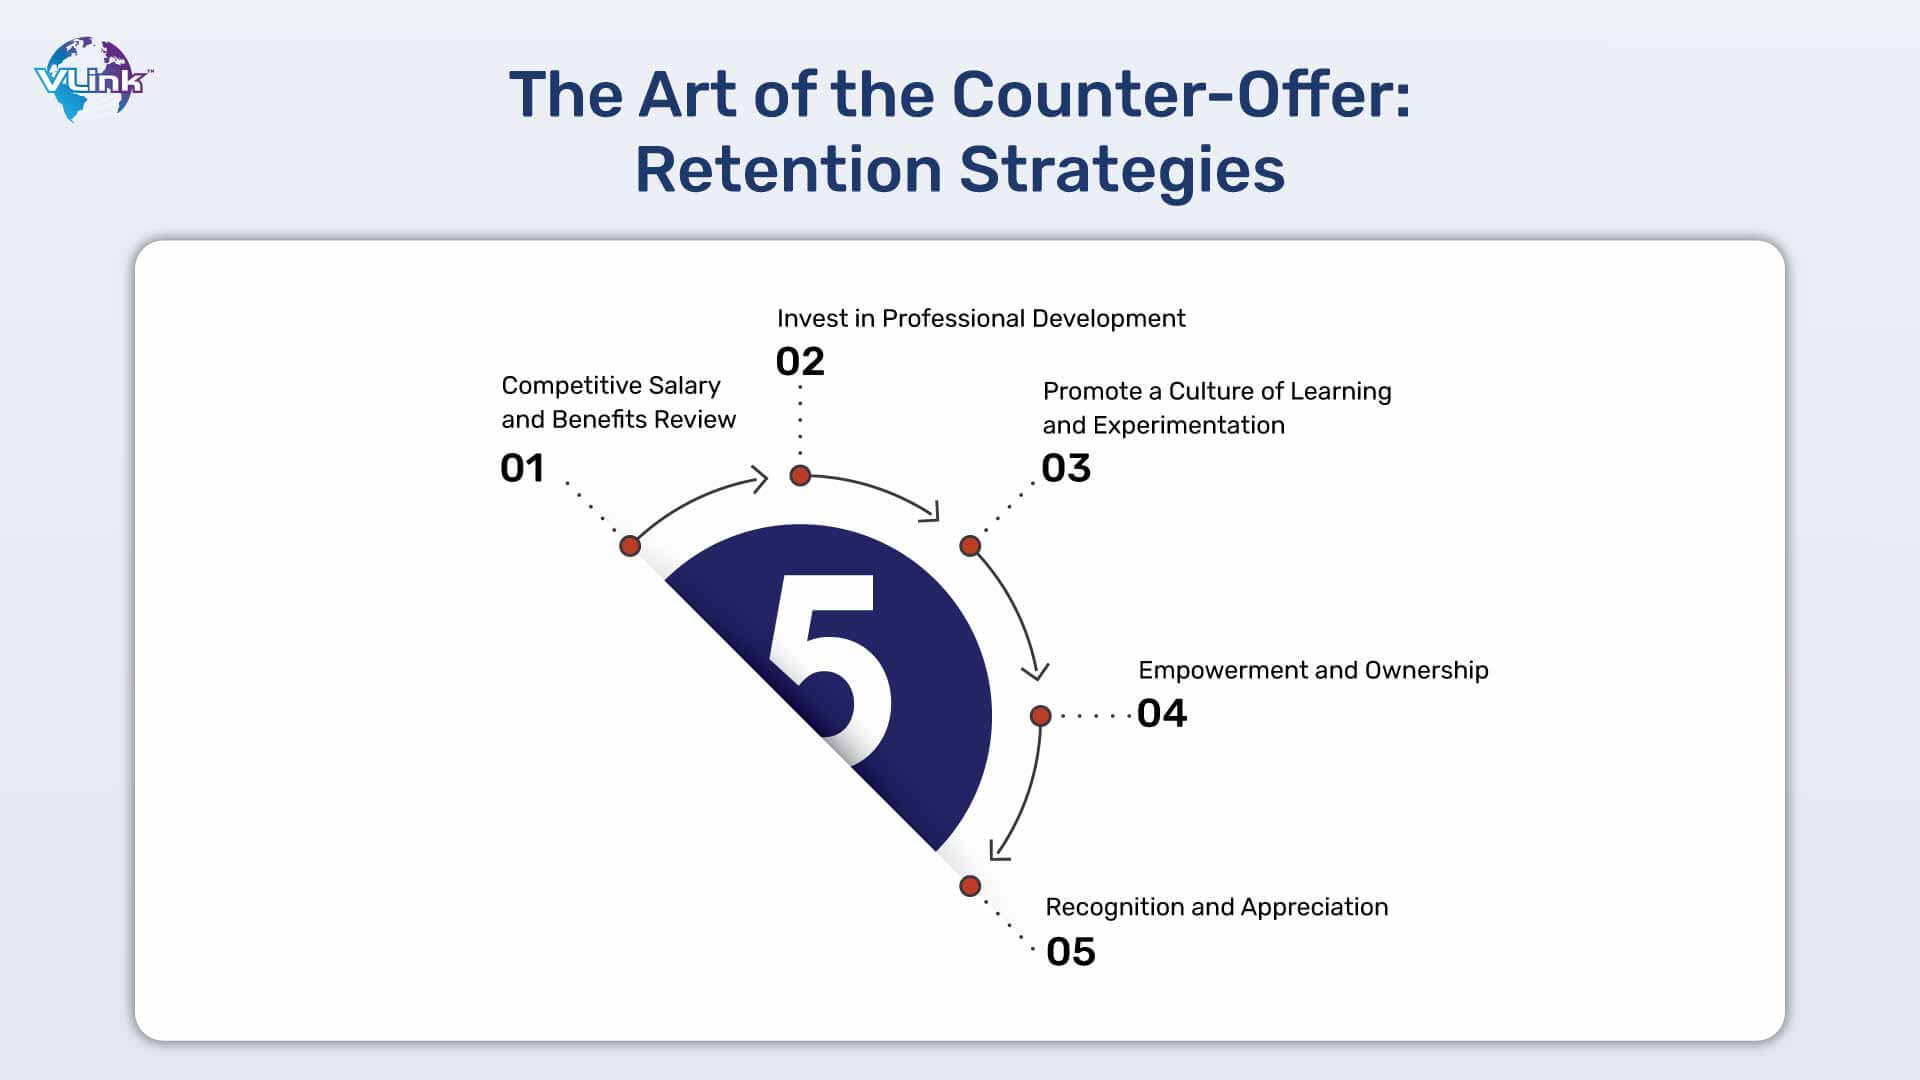 The Art of the Counter-Offer Retention Strategies